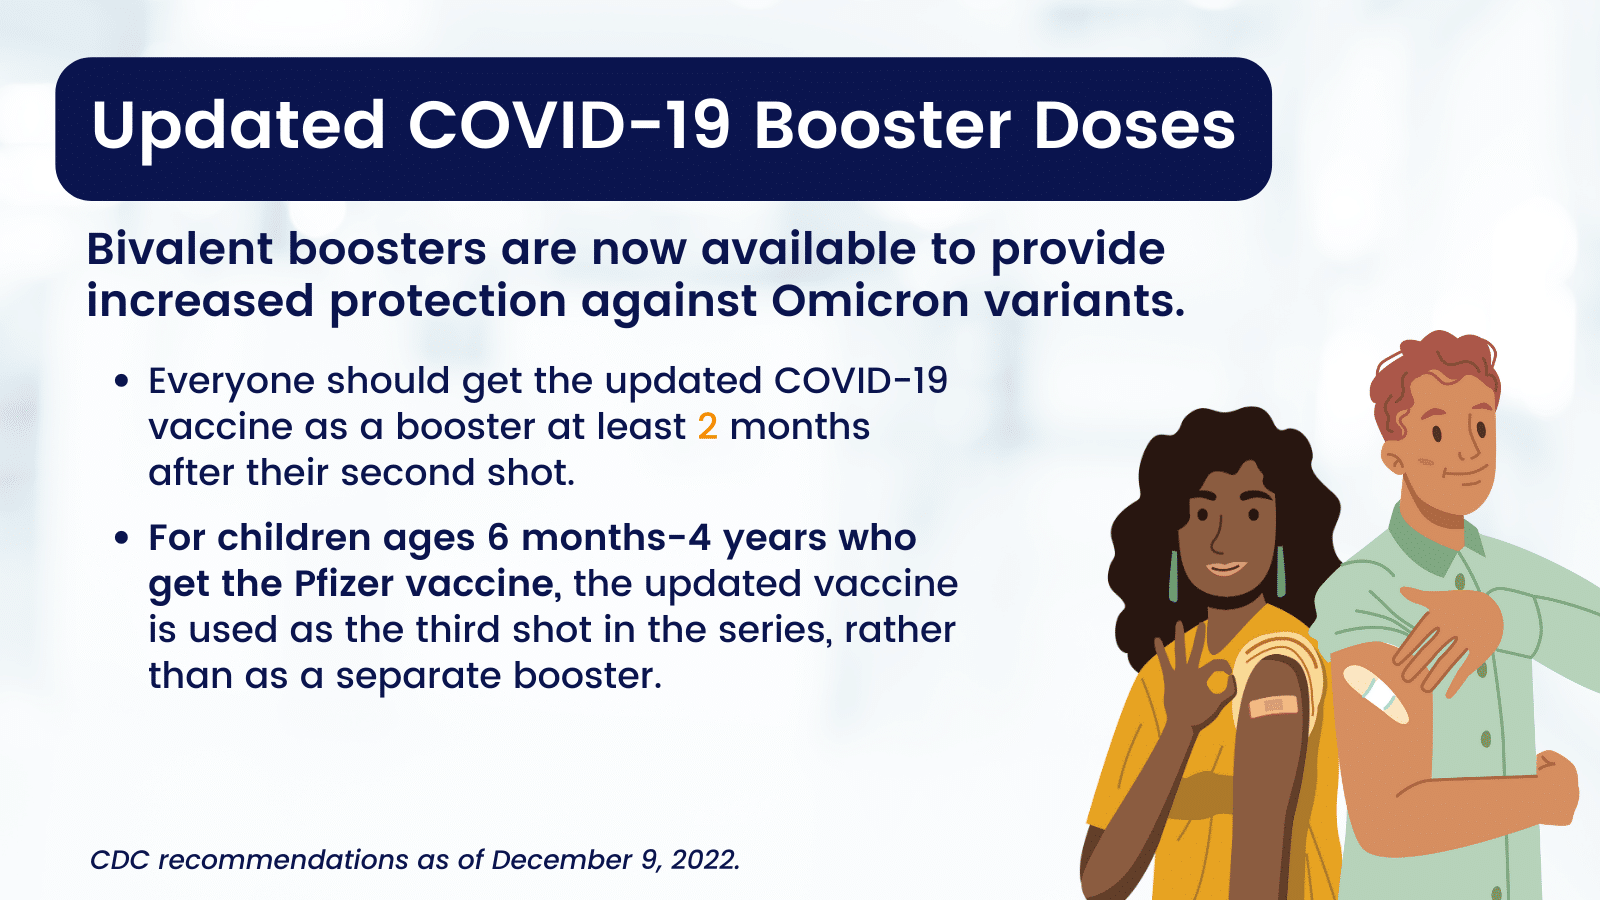 https://publichealthcollaborative.org/wp-content/uploads/2022/10/ENG_Twitter_updated-booster-doses-2.png